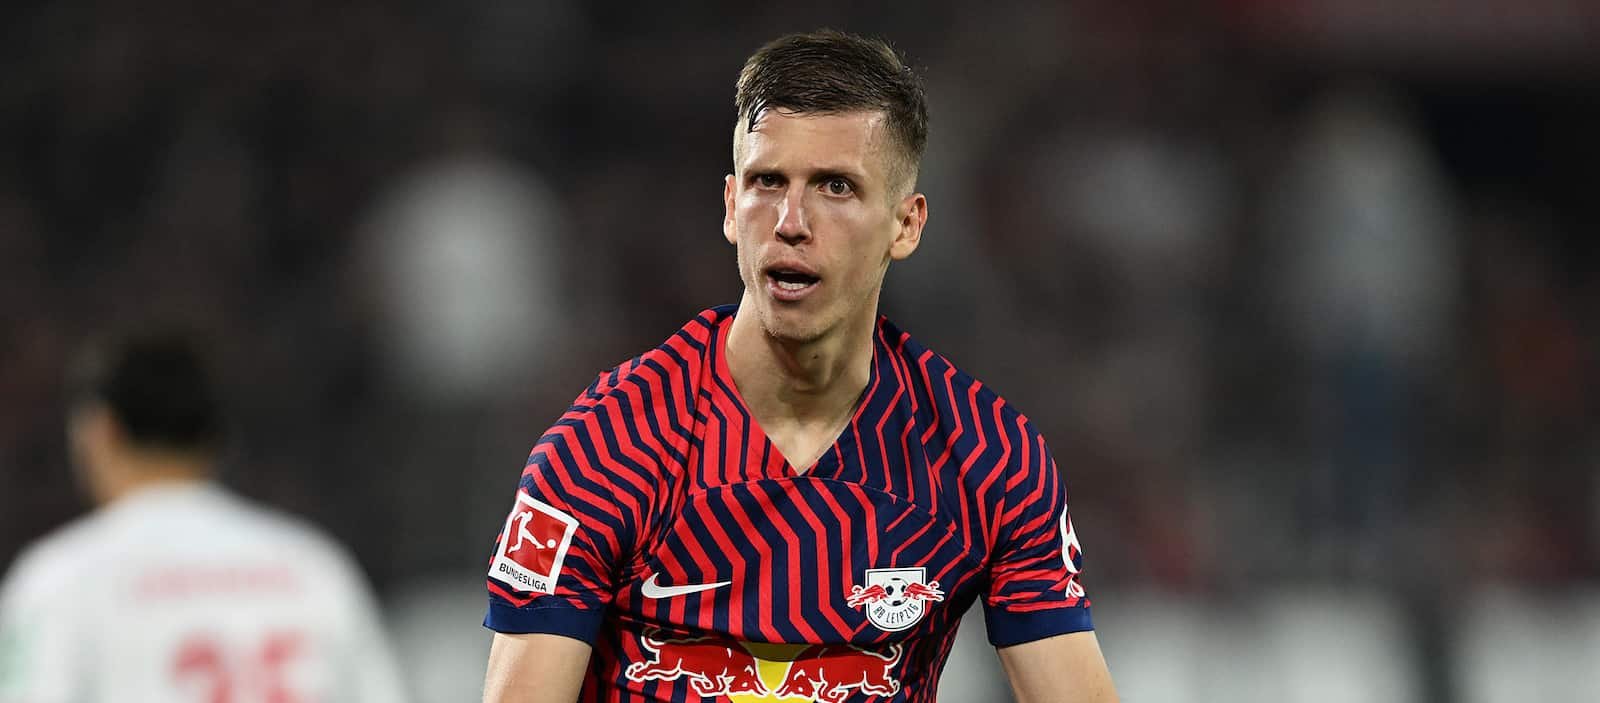 RB Leipzig midfielder Dani Olmo open to joining the Premier League this summer amidst Manchester United links – Man United News And Transfer News